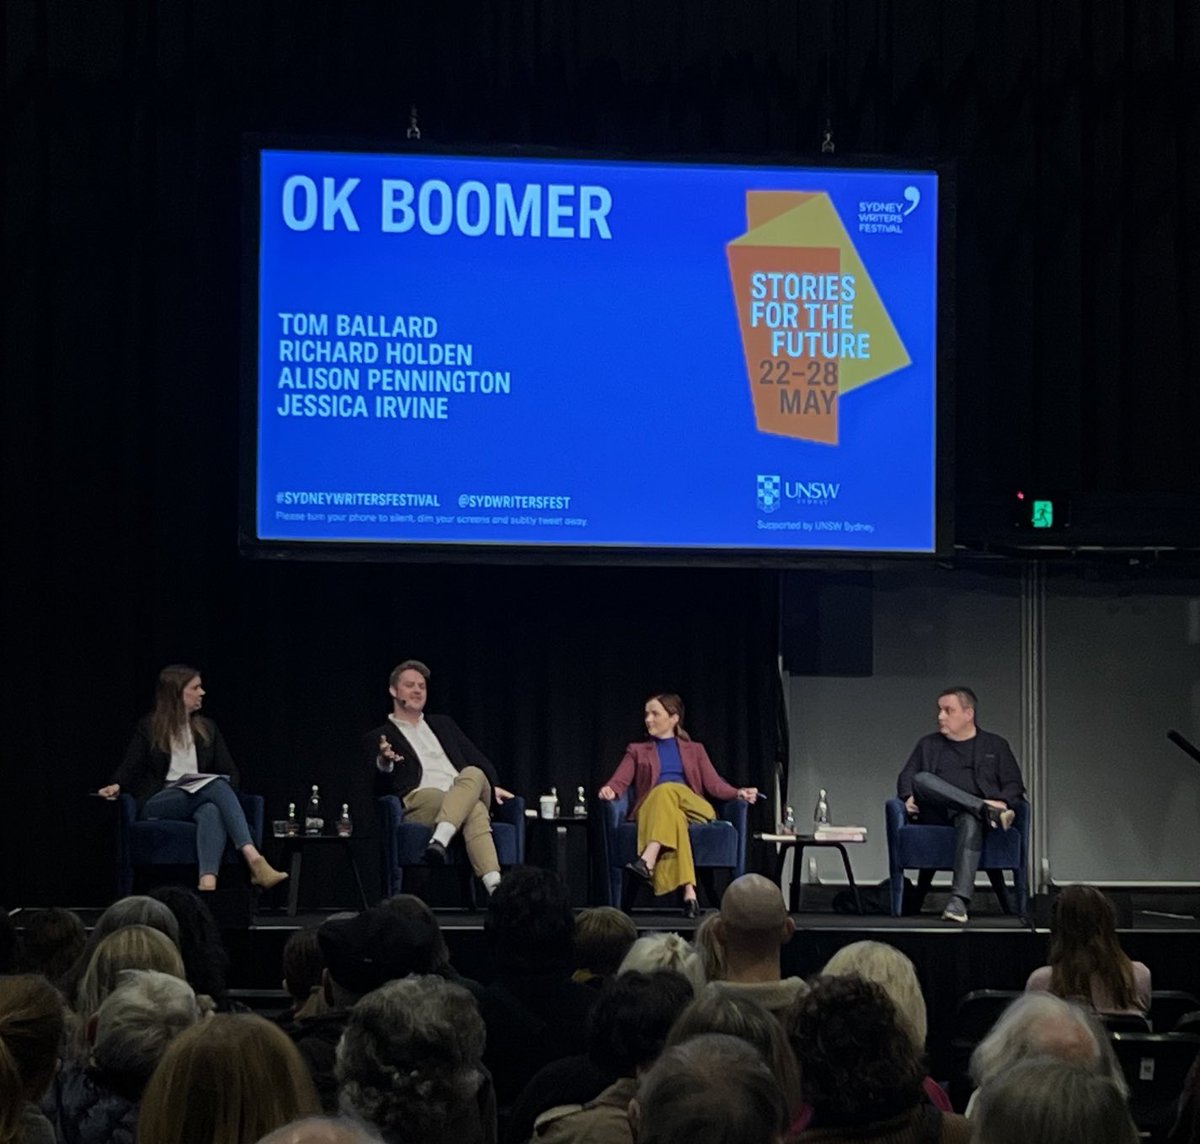 ‘The millennial rage comes from
seeing how much better things could be’. And this was just the start of the conversation ⁦@SydWritersFest⁩ #SydneyWritersFestival #okboomer